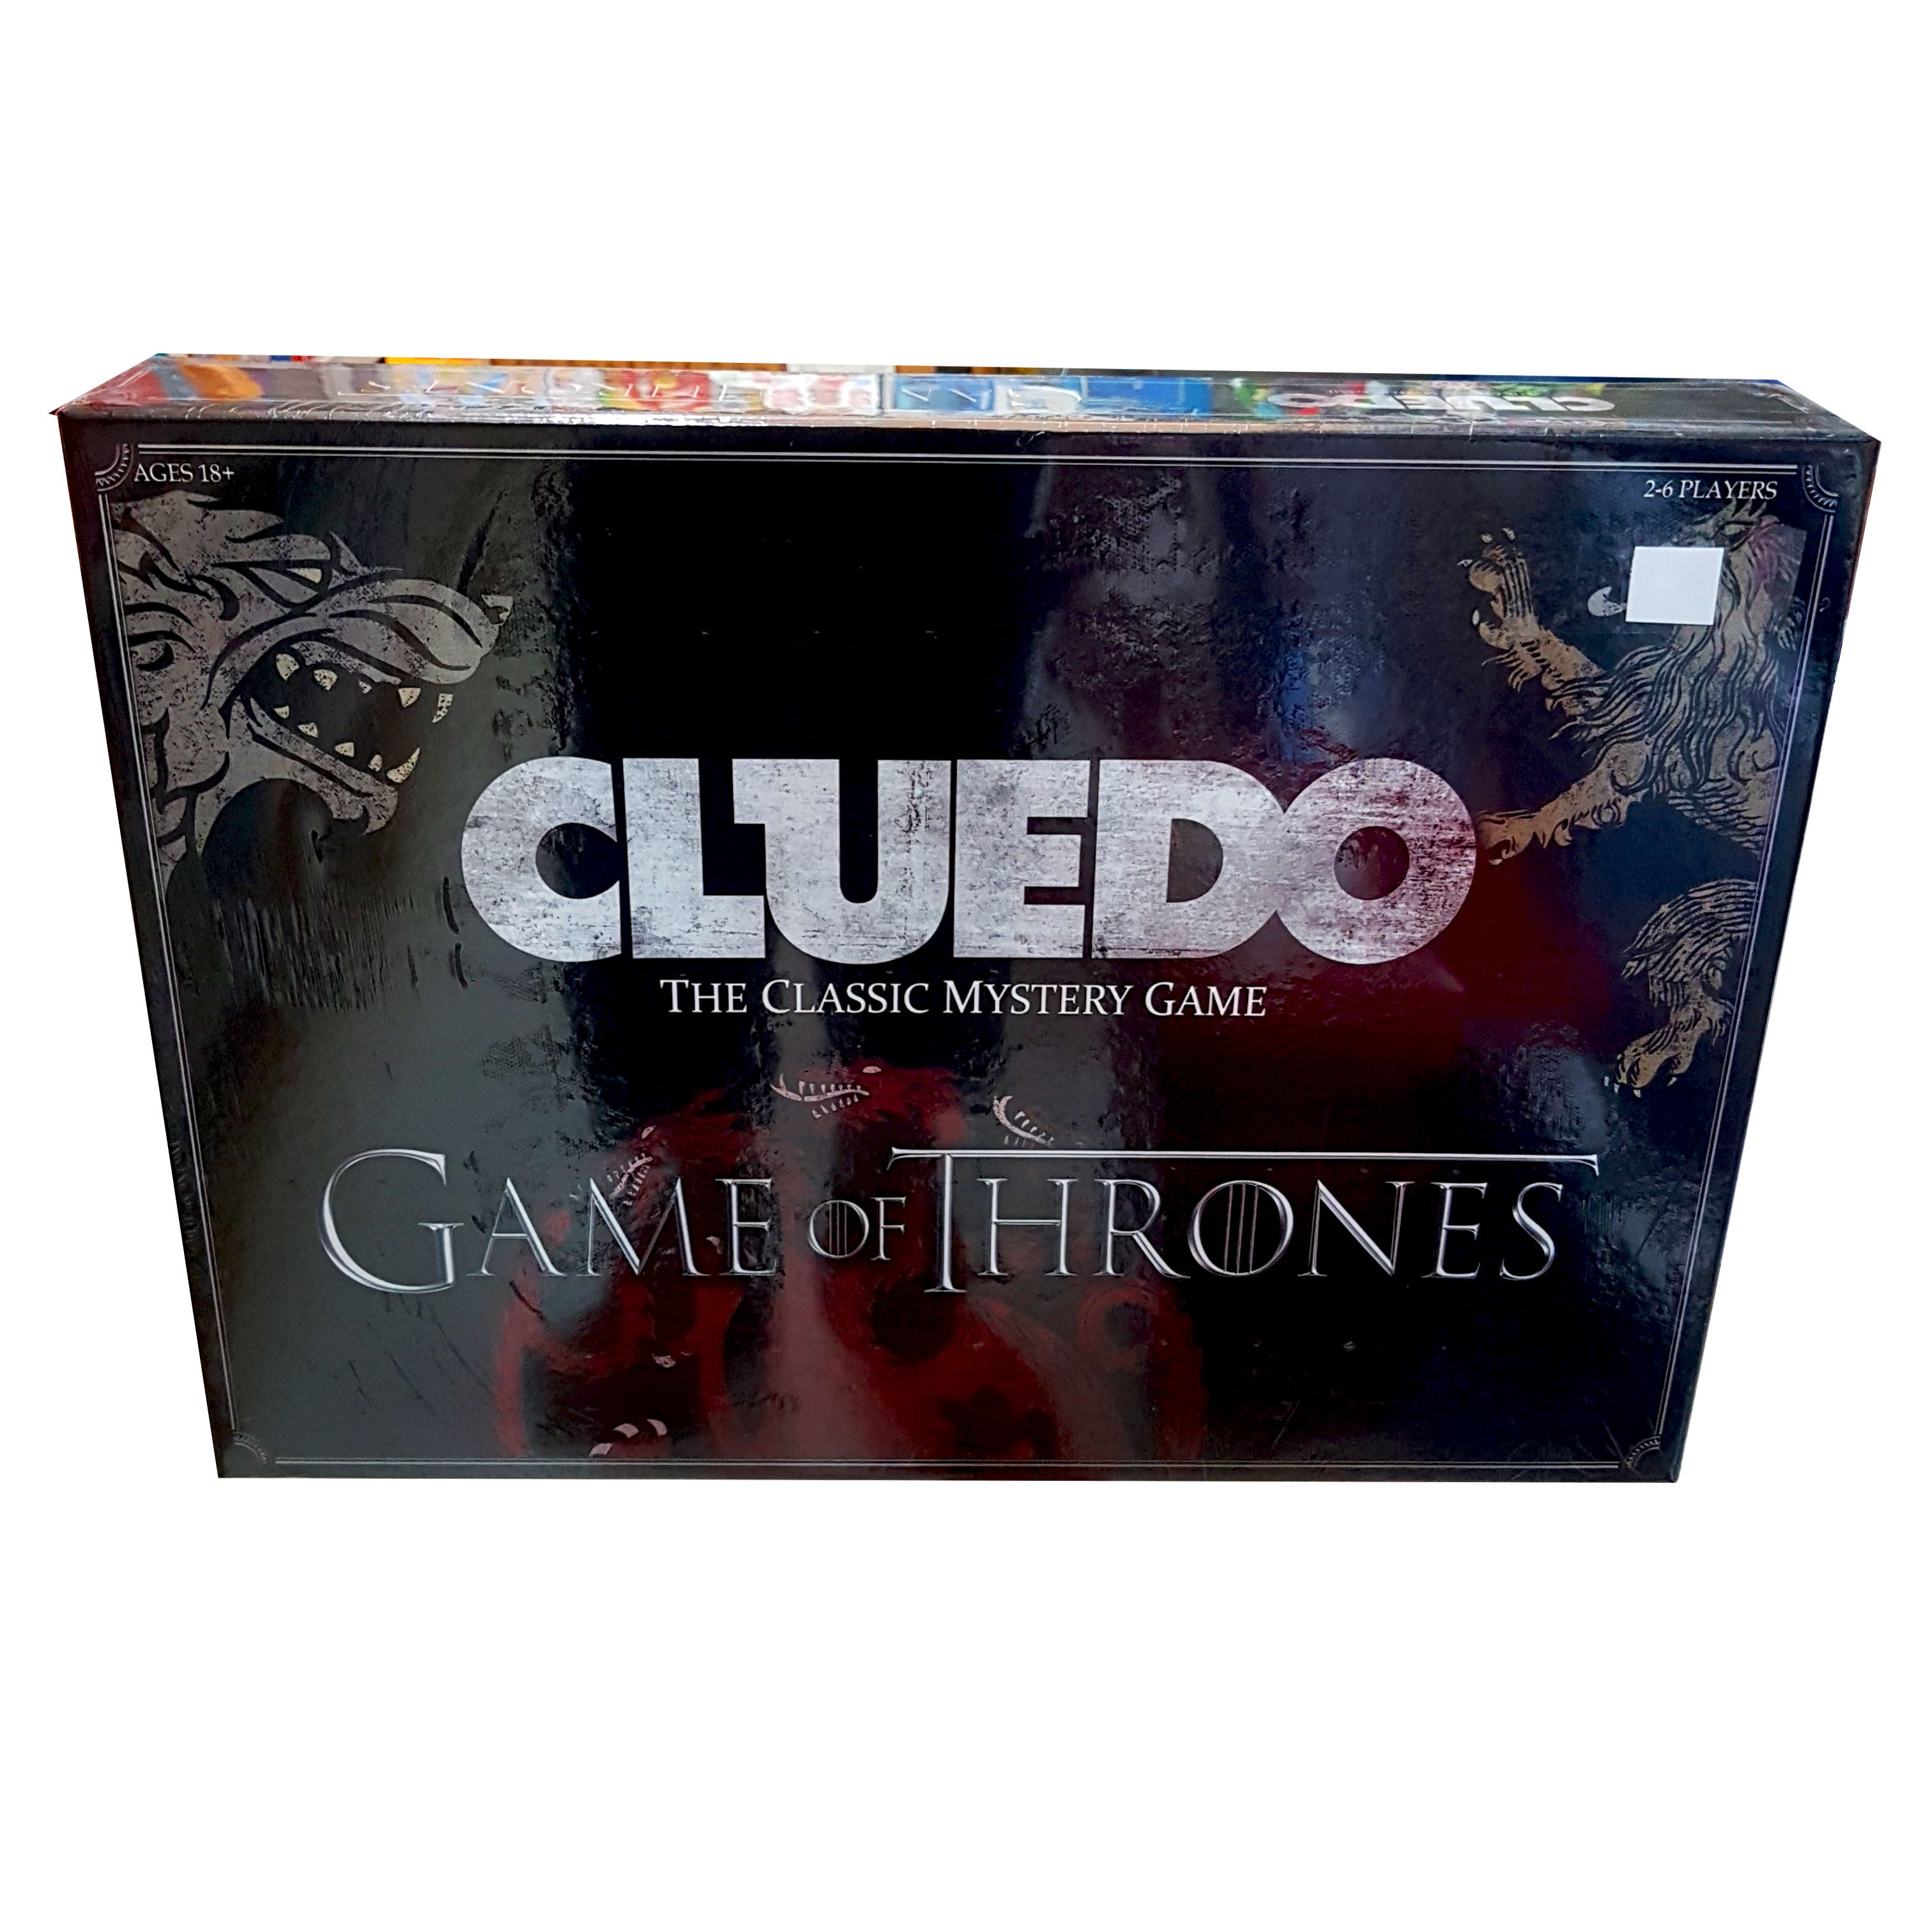 Game of Thrones Cluedo Mystery Board Game - Dual Setting, 12 Characters, Custom Weapons & Cards, Intrigue and Rumor Dynamics - Exclusive Double-Sided Gameboard Edition